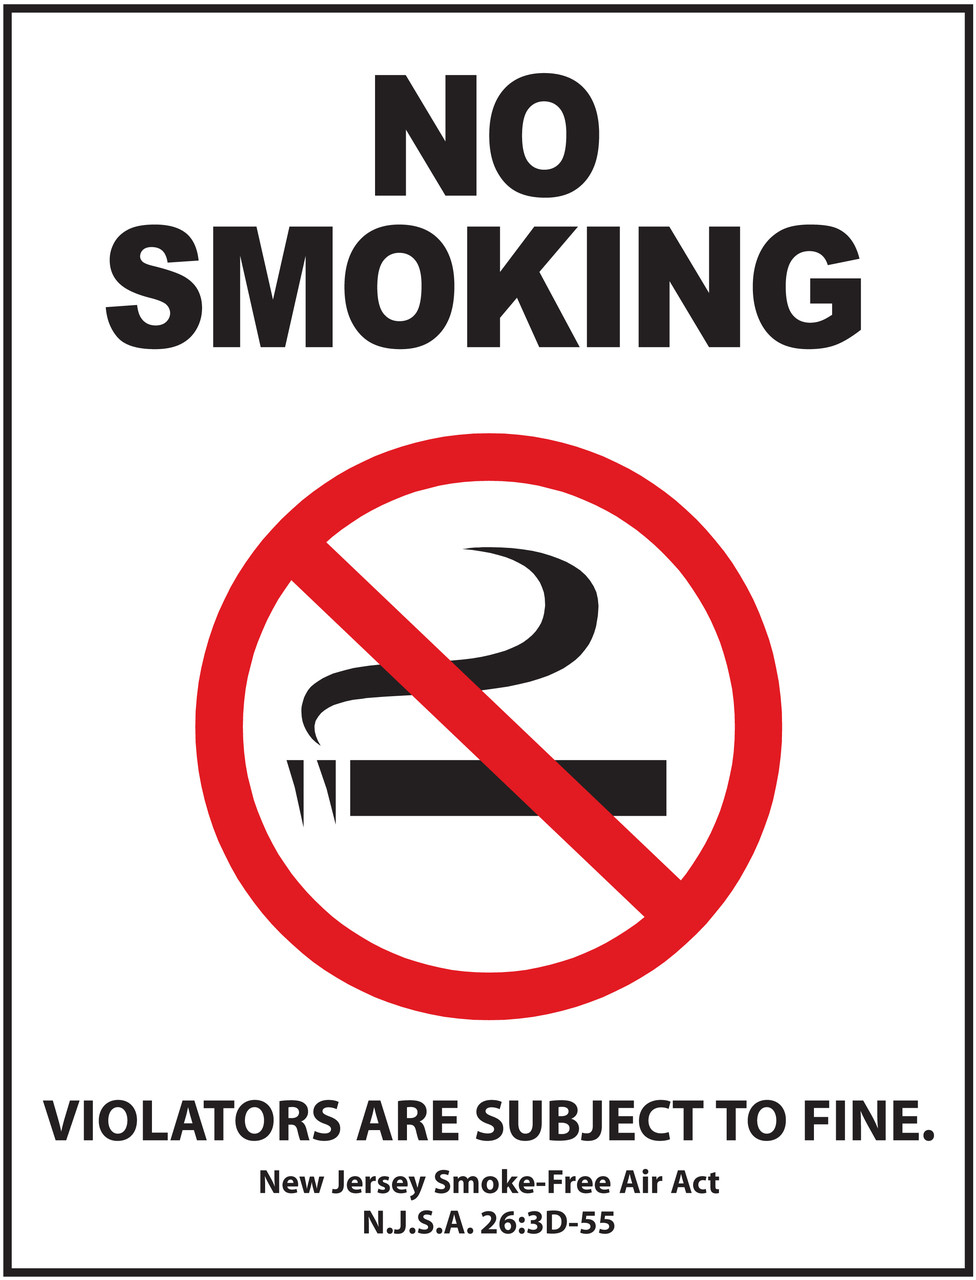 No Smoking, Violators Are Subject To Fine. New Jersey Smoke-Free Air Act, N.J.S.A. 26:3D-55